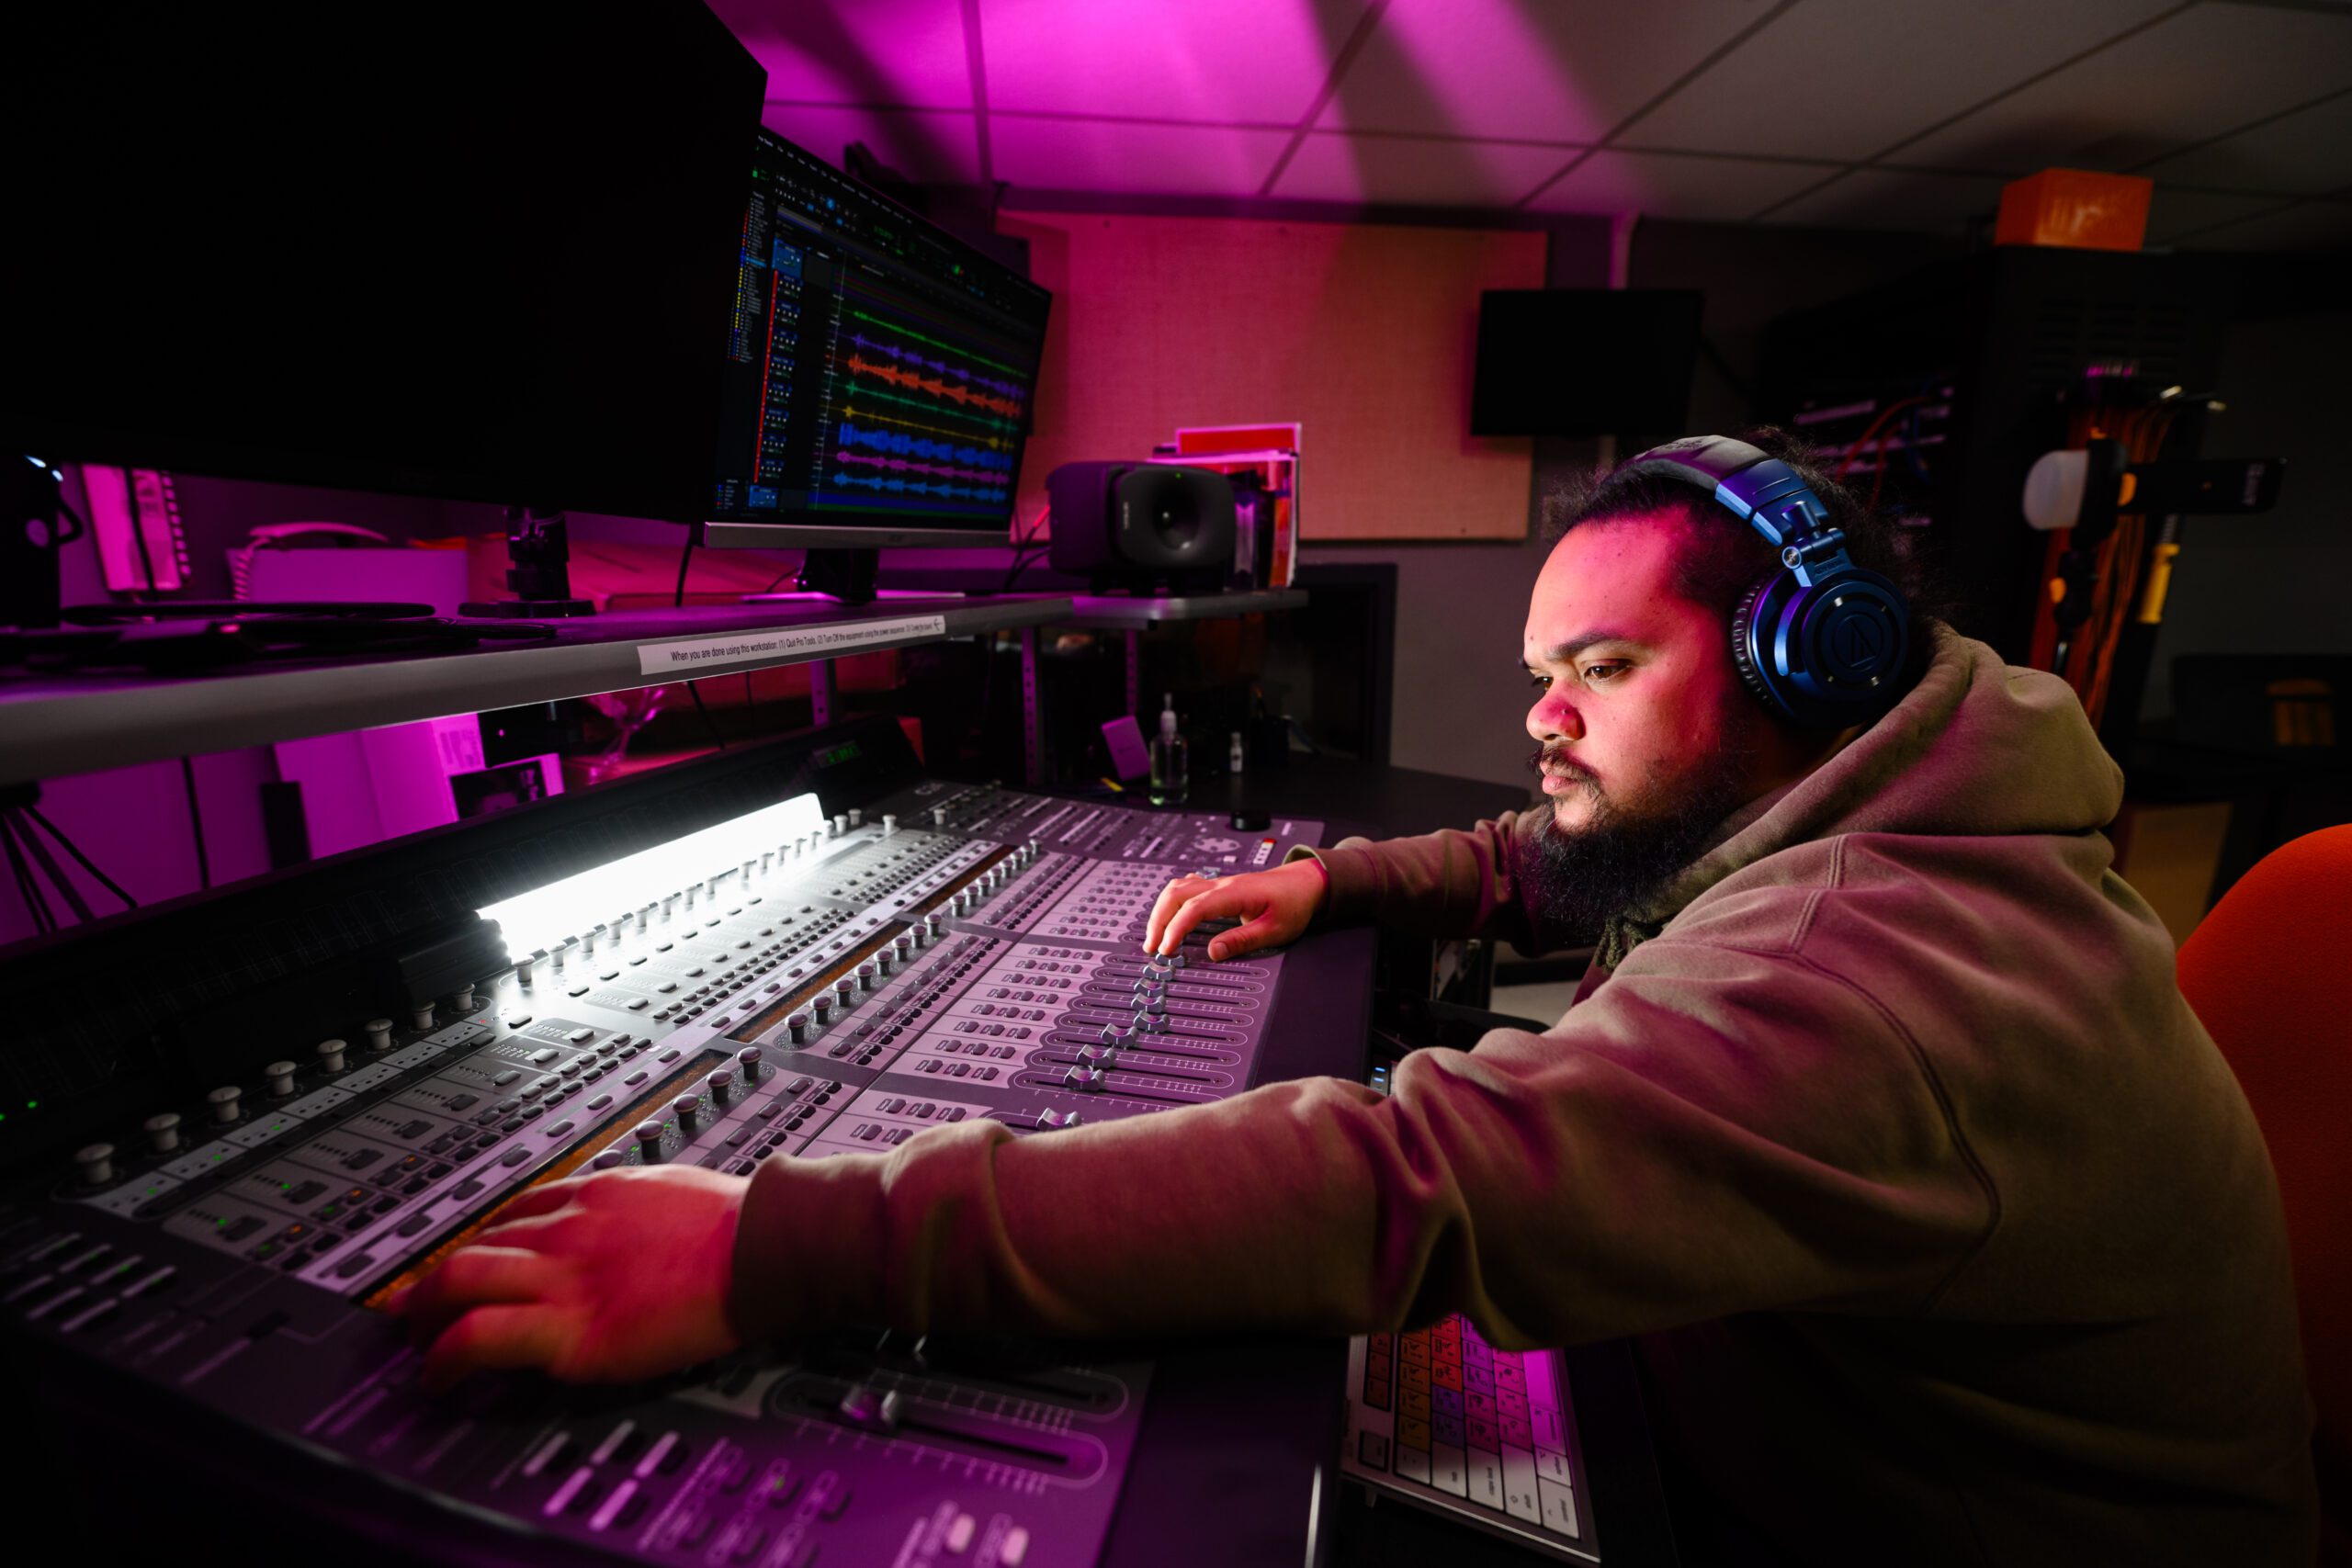 Melvin Villaver works on a mixing board while listening to music on his headphones.